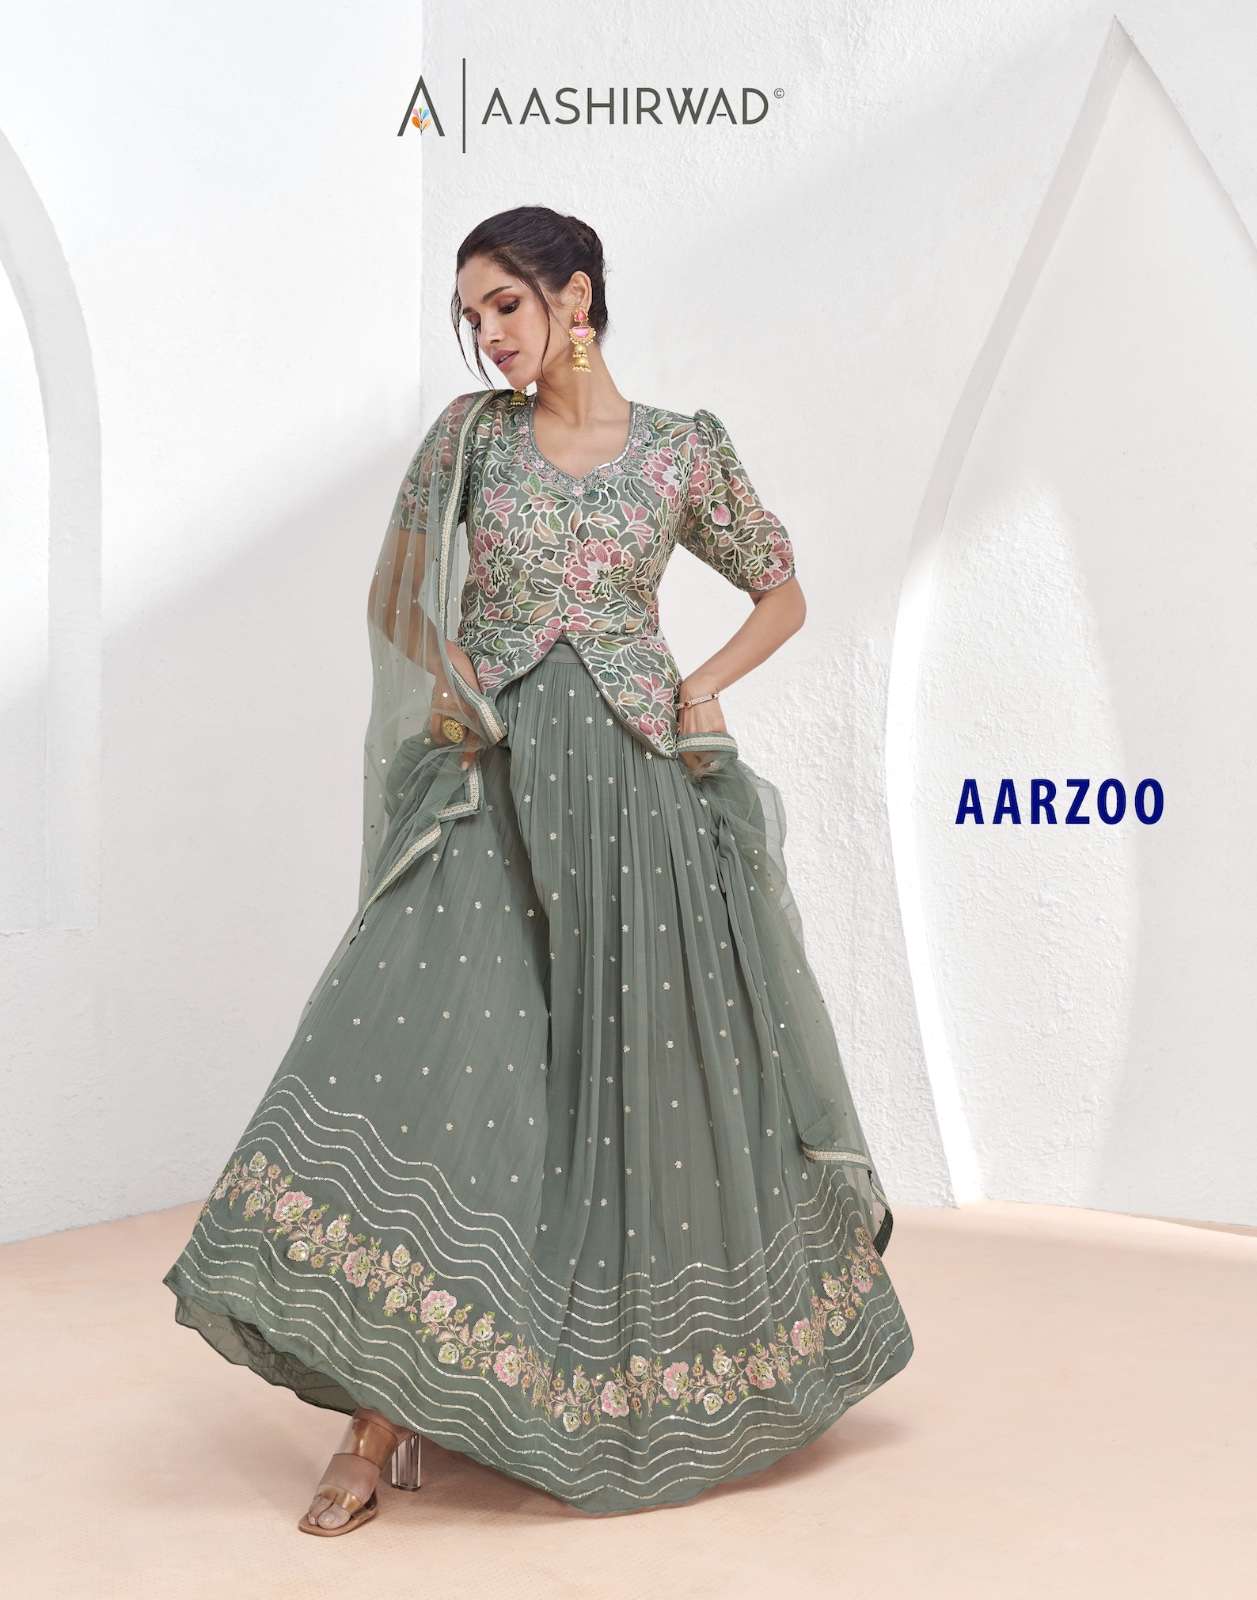 AASHIRWAD CREATION AARZOO GEORGETTE WITH EMBROIDERY WORK PAR...